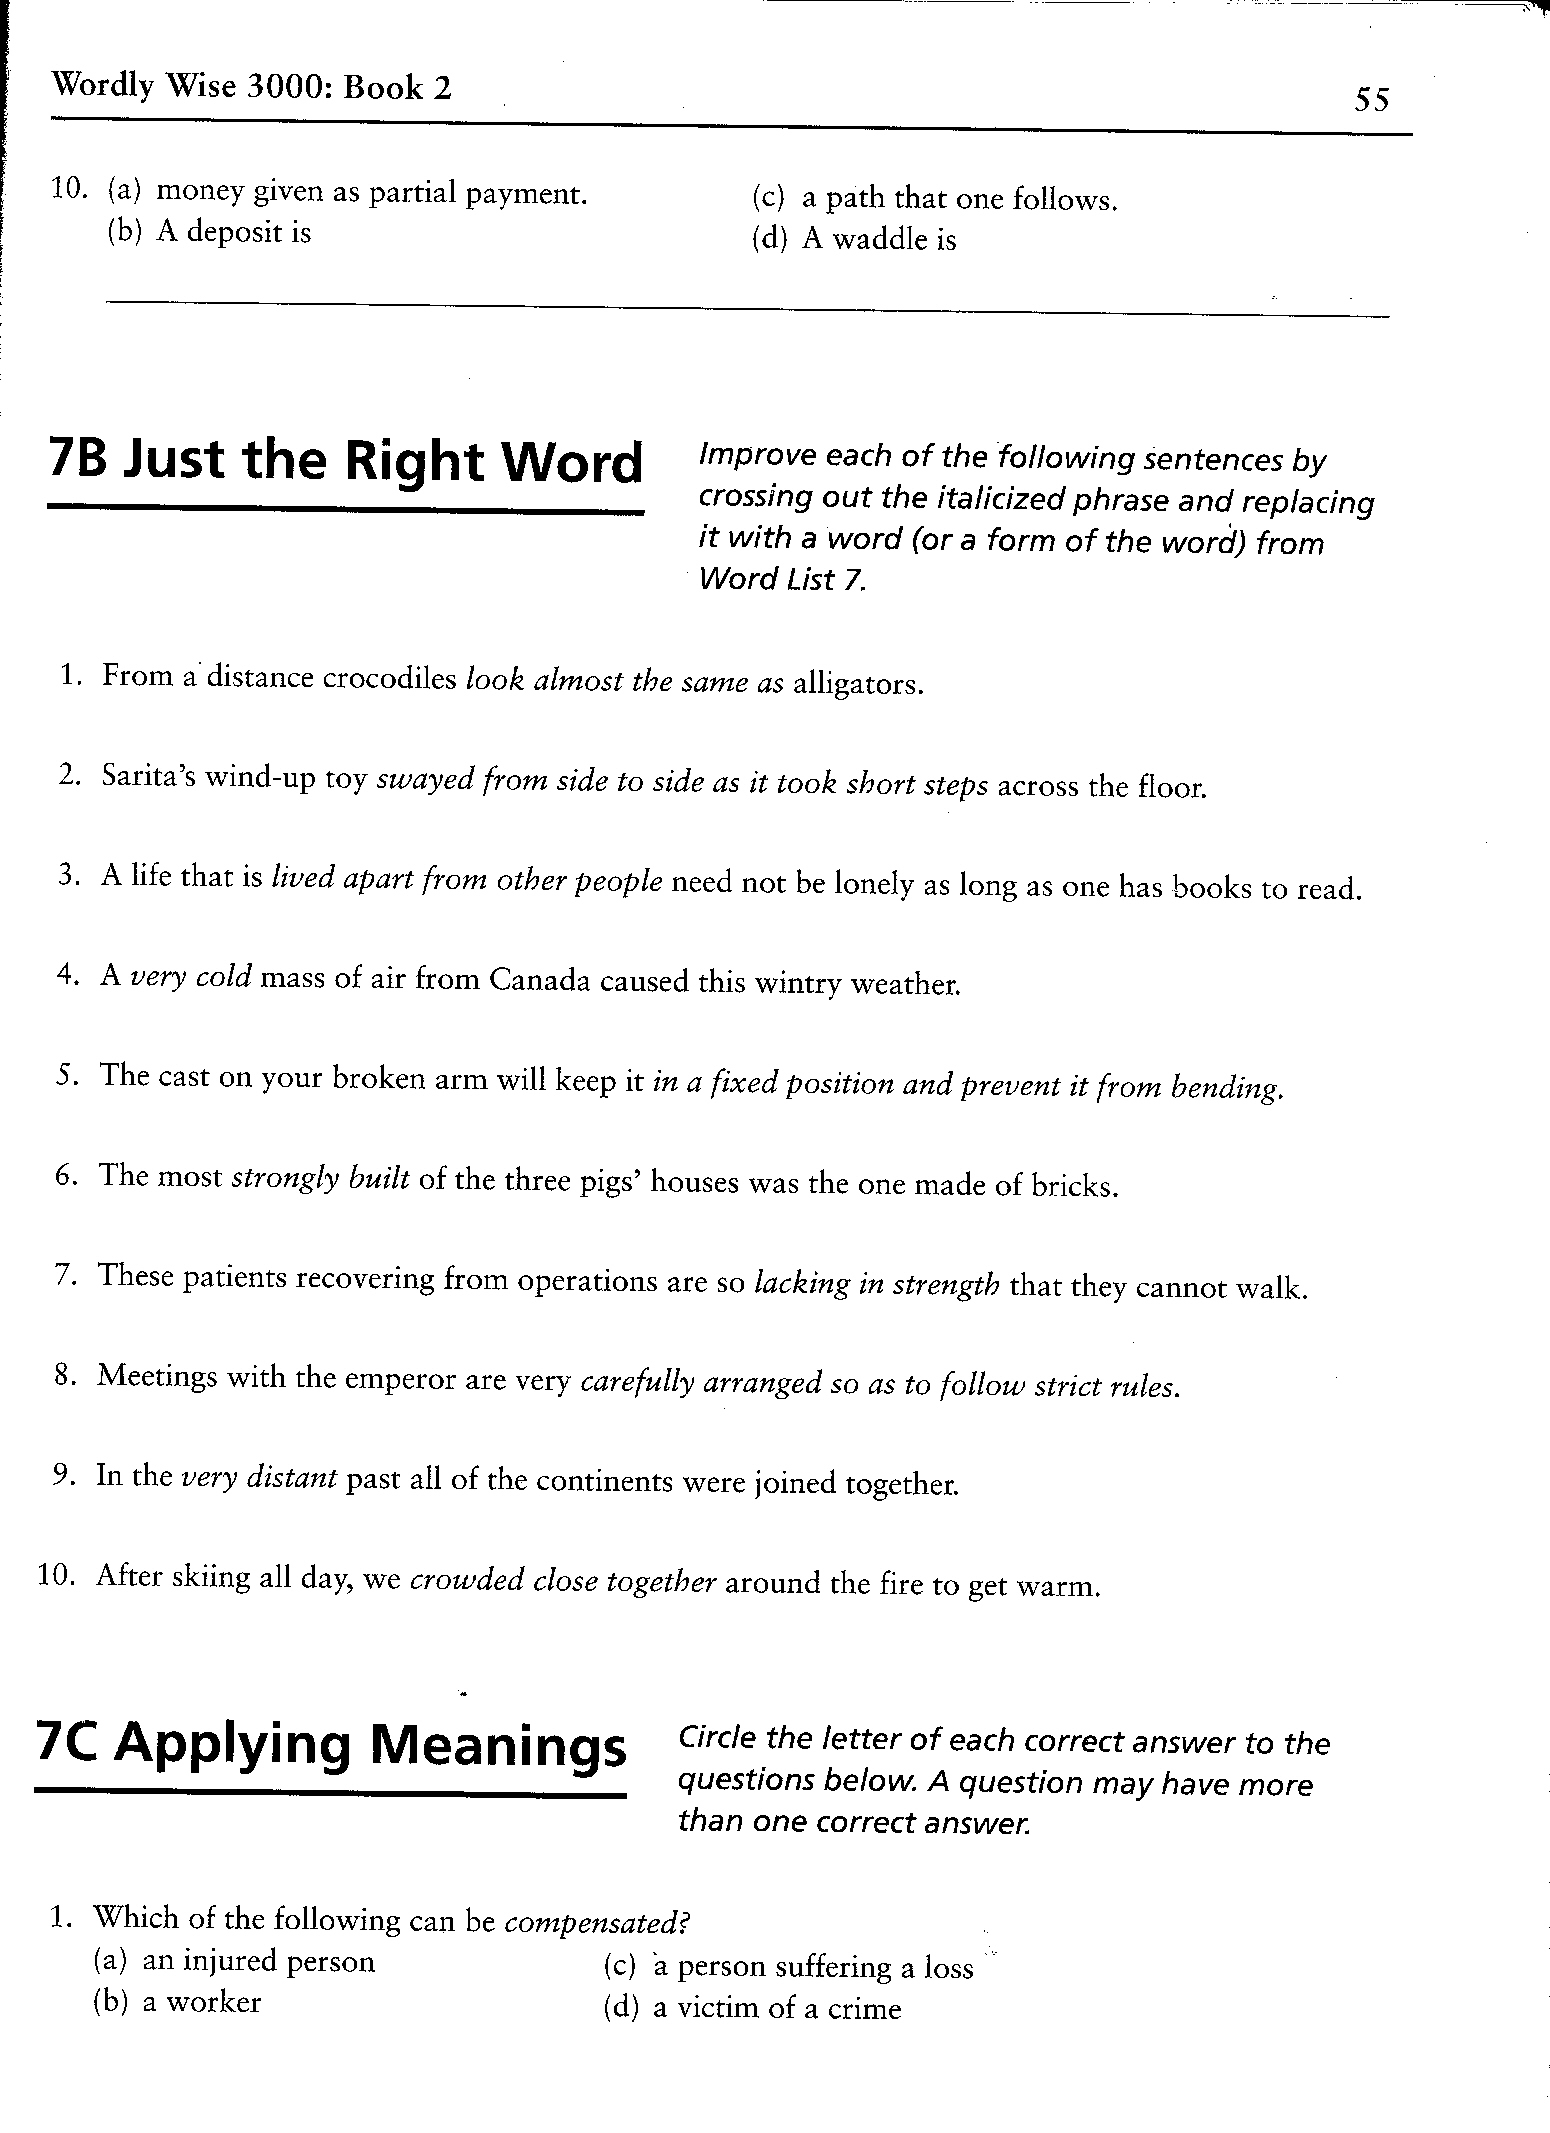 Wordly Wise Grade 6 Lesson 5 Image